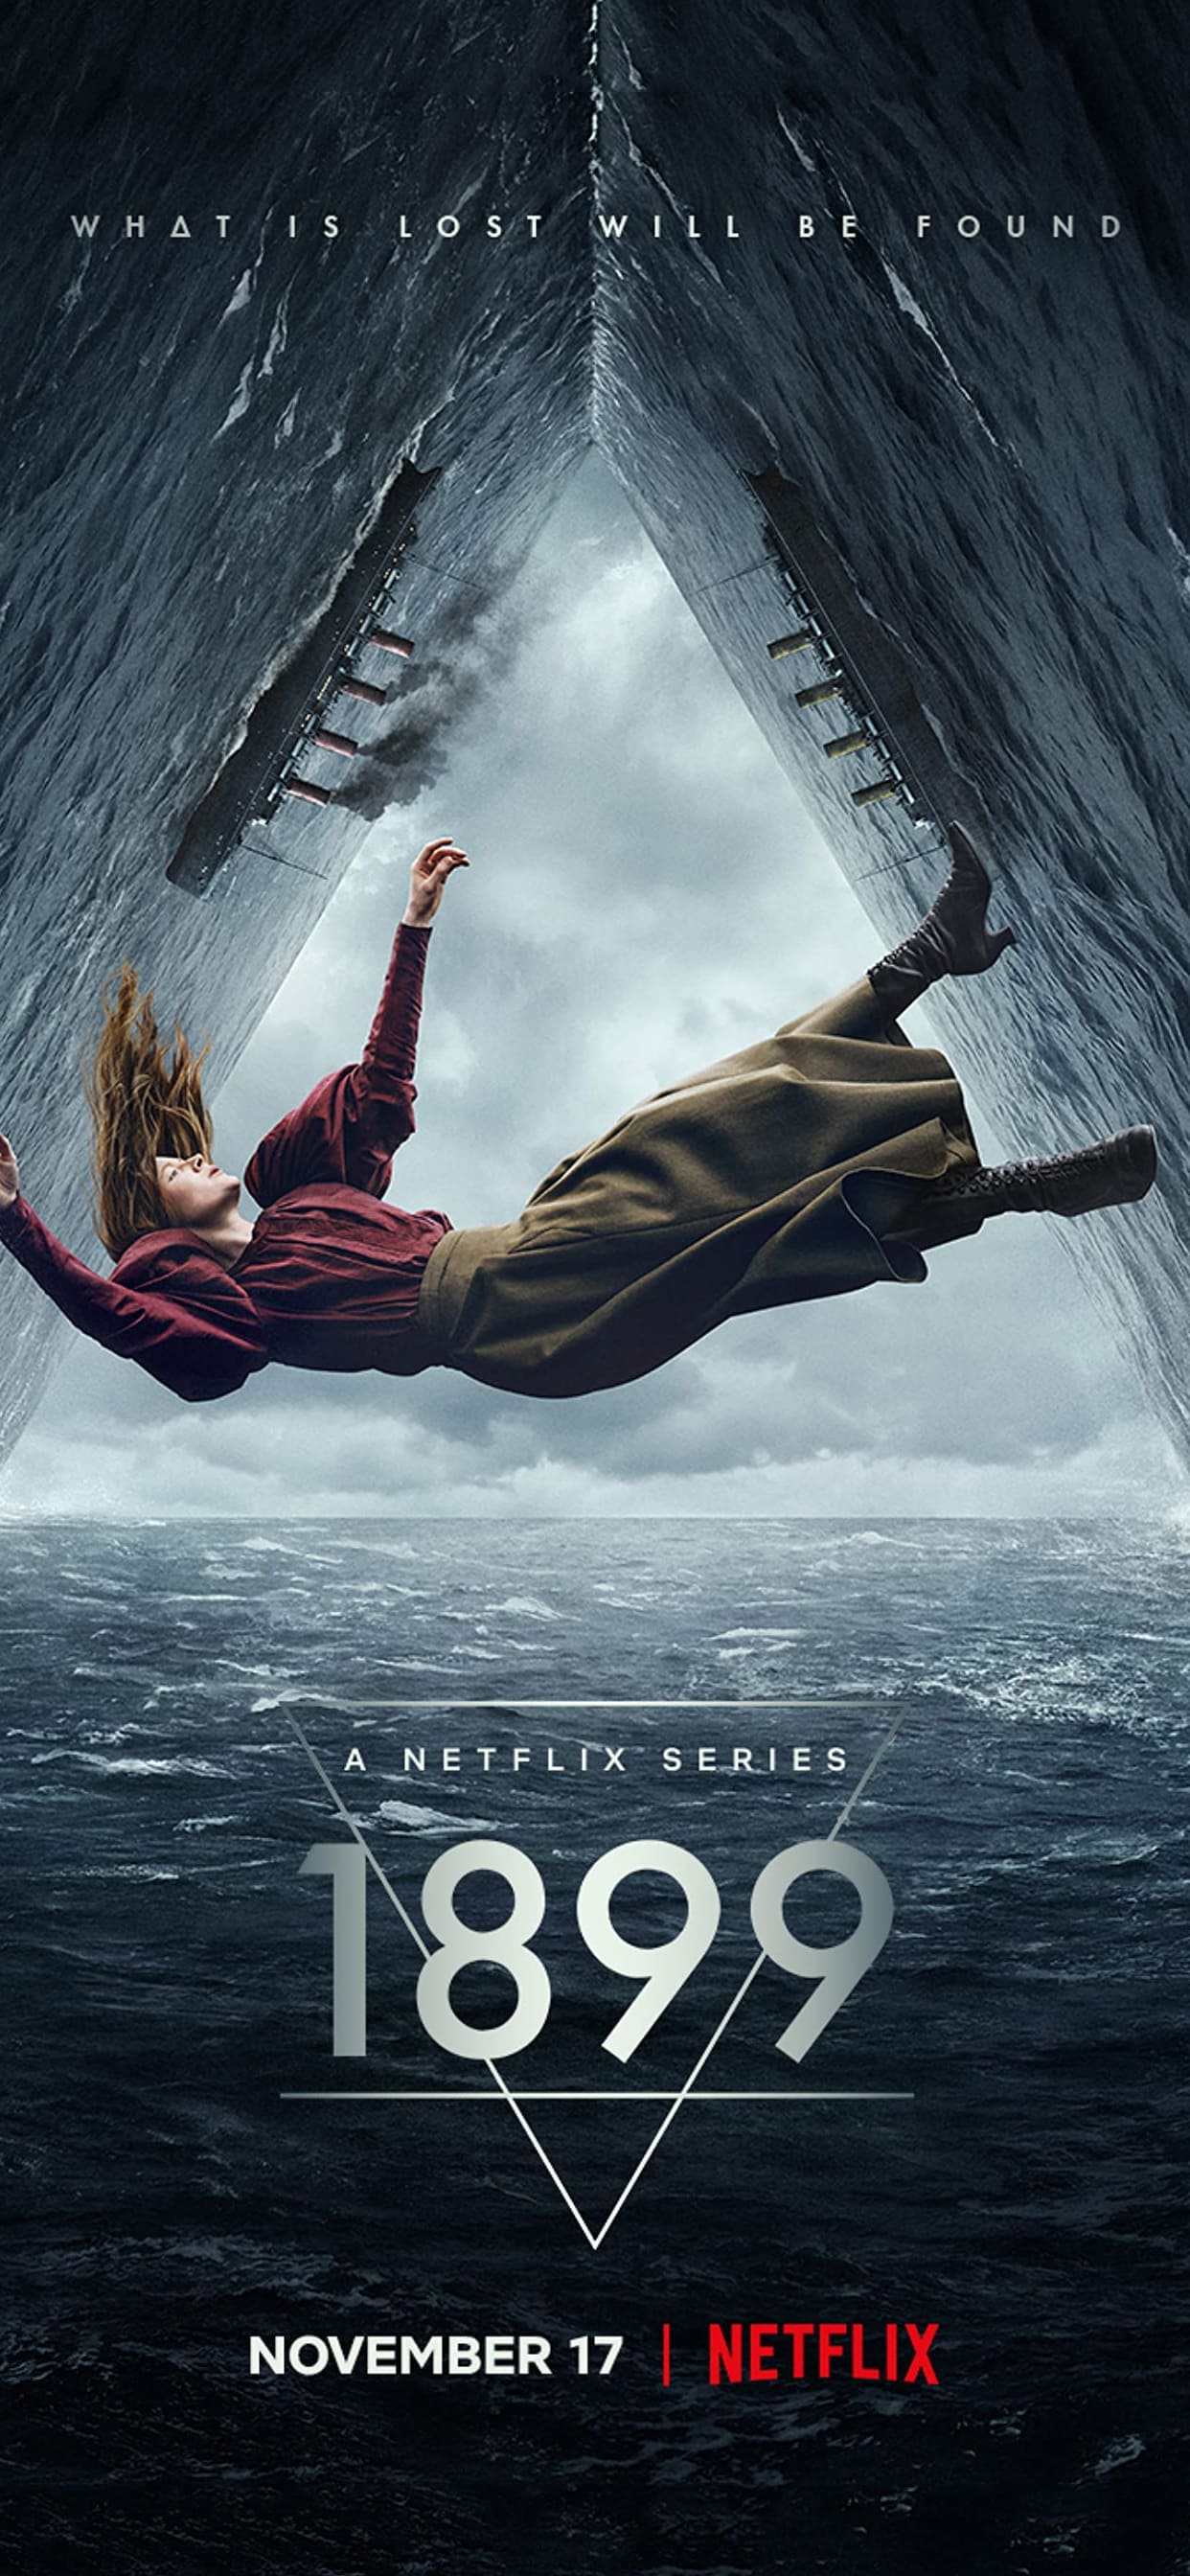 A woman falling from the sky into the sea, with the Netflix logo and the release date of November 17th. - Netflix